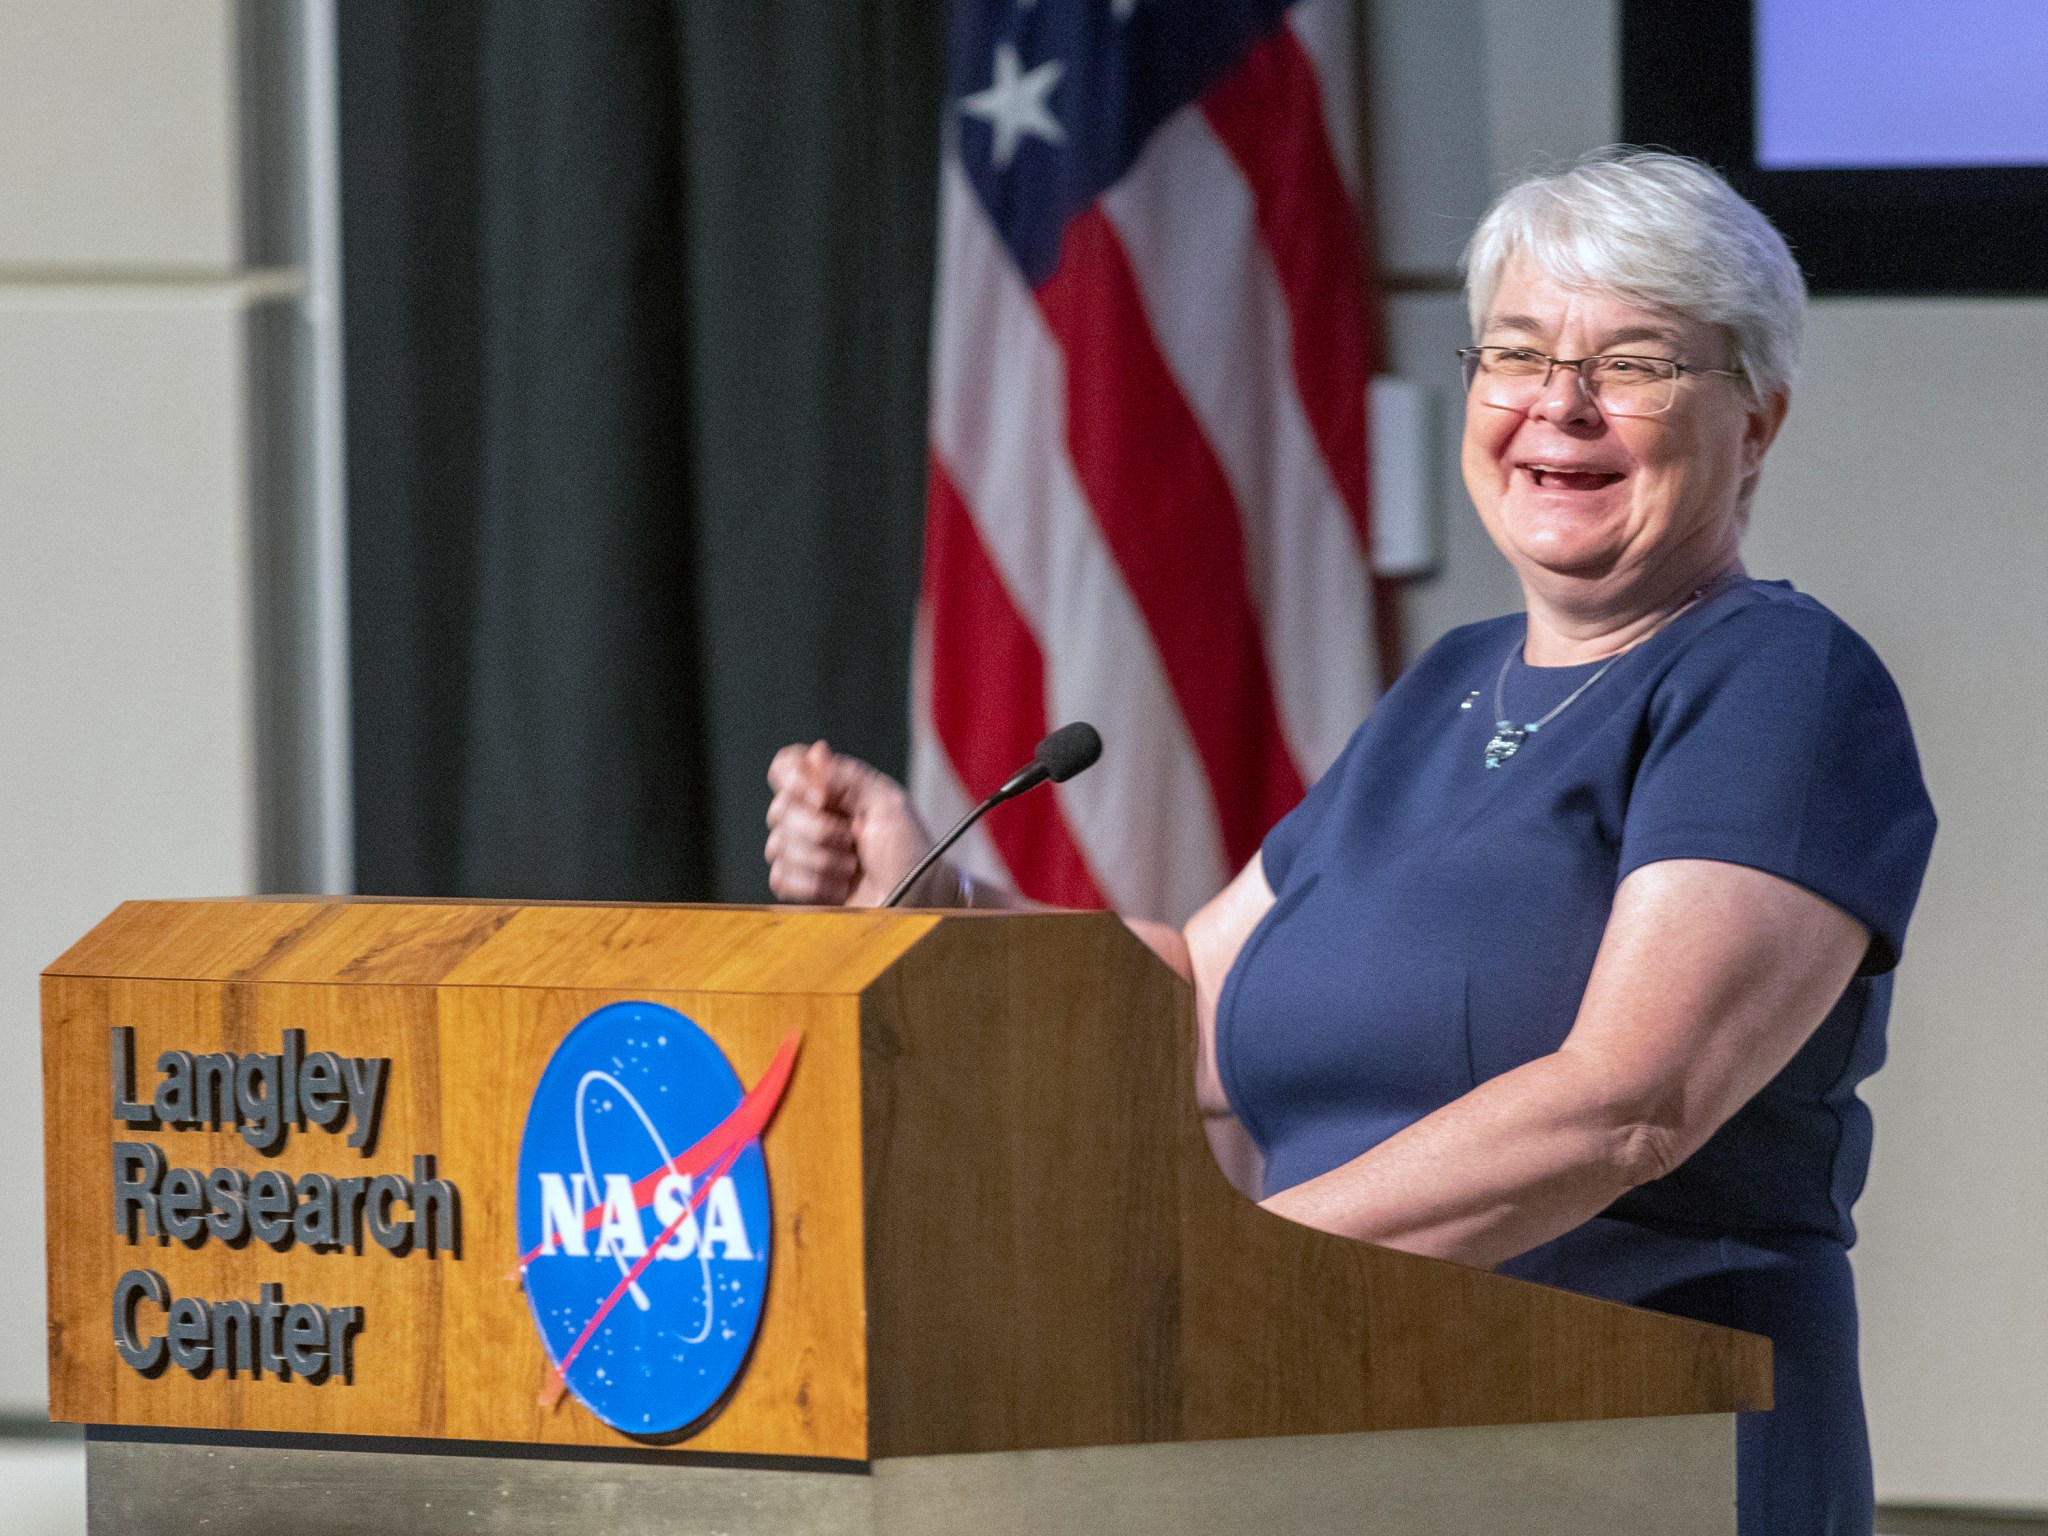 Ceremony keynote speaker Deborah Douglas, the director of collections and curator of science and technology at the MIT Museum and a former visiting historian at Langley, praised the honorees for their individual and team-building efforts.